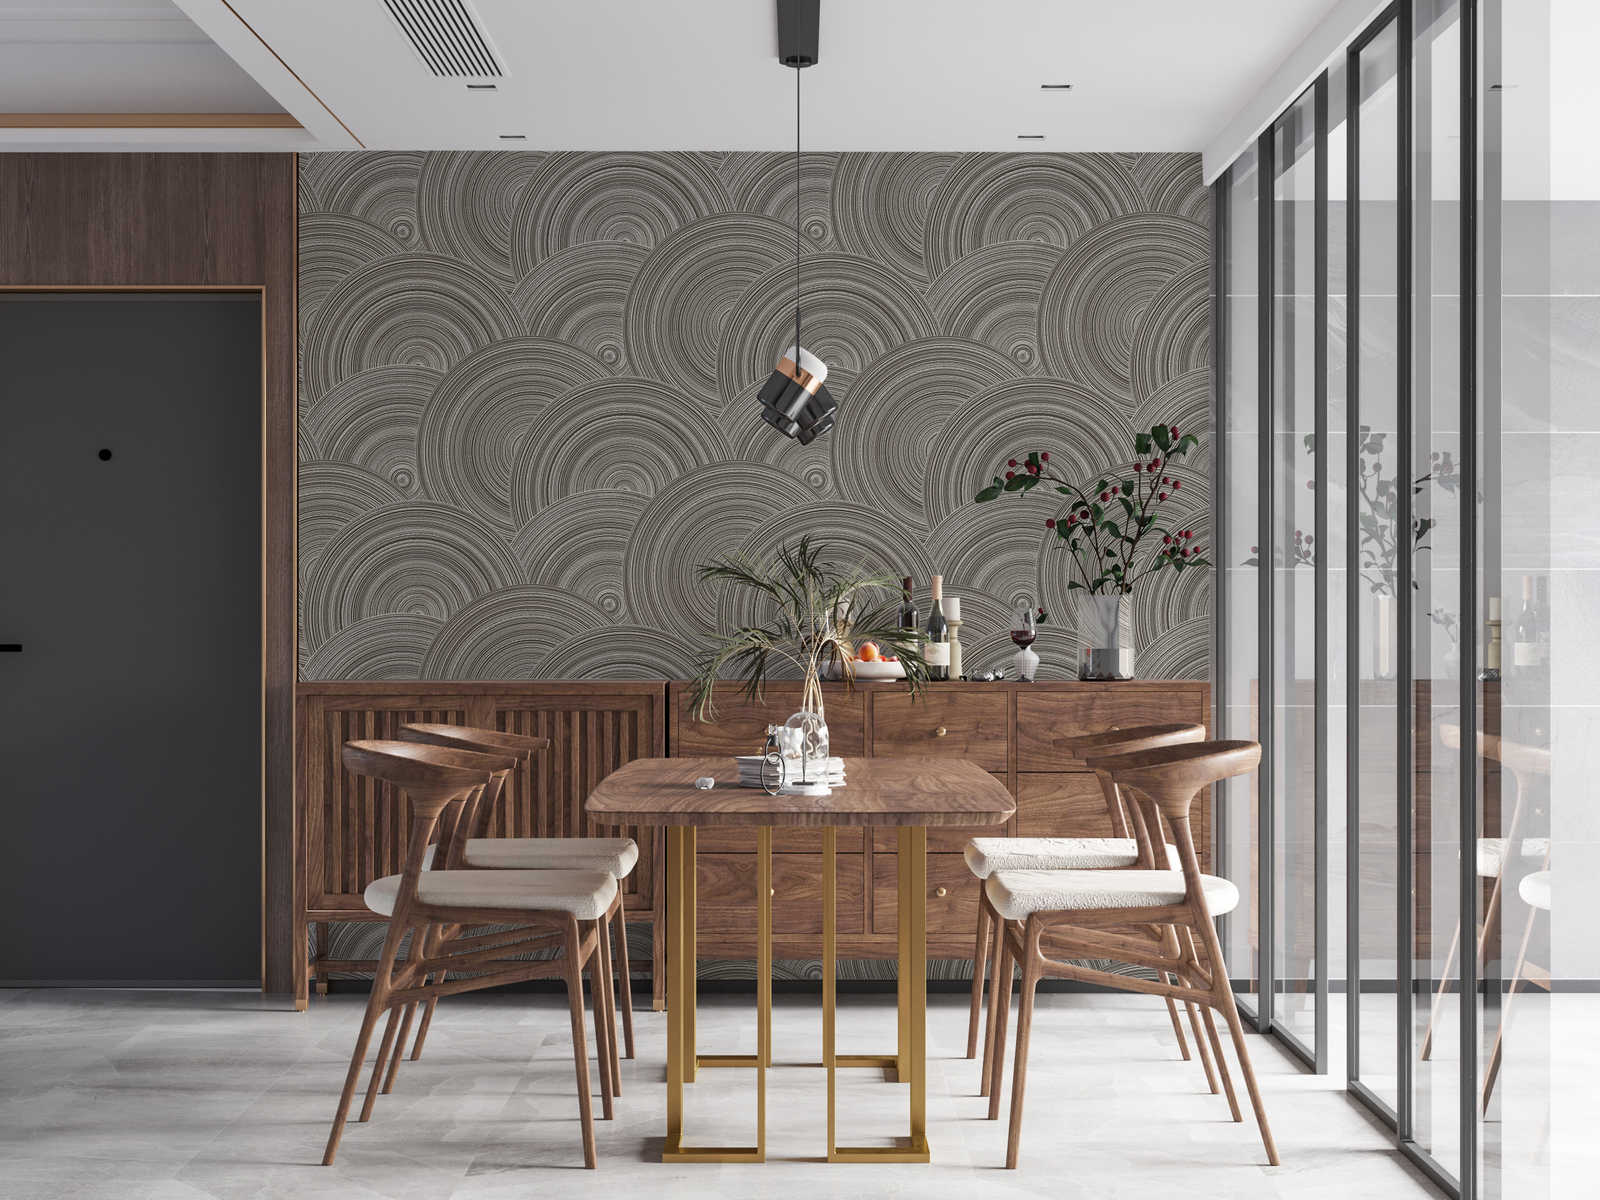             Circle wallpaper with ethno design with texture effect - brown, cream
        